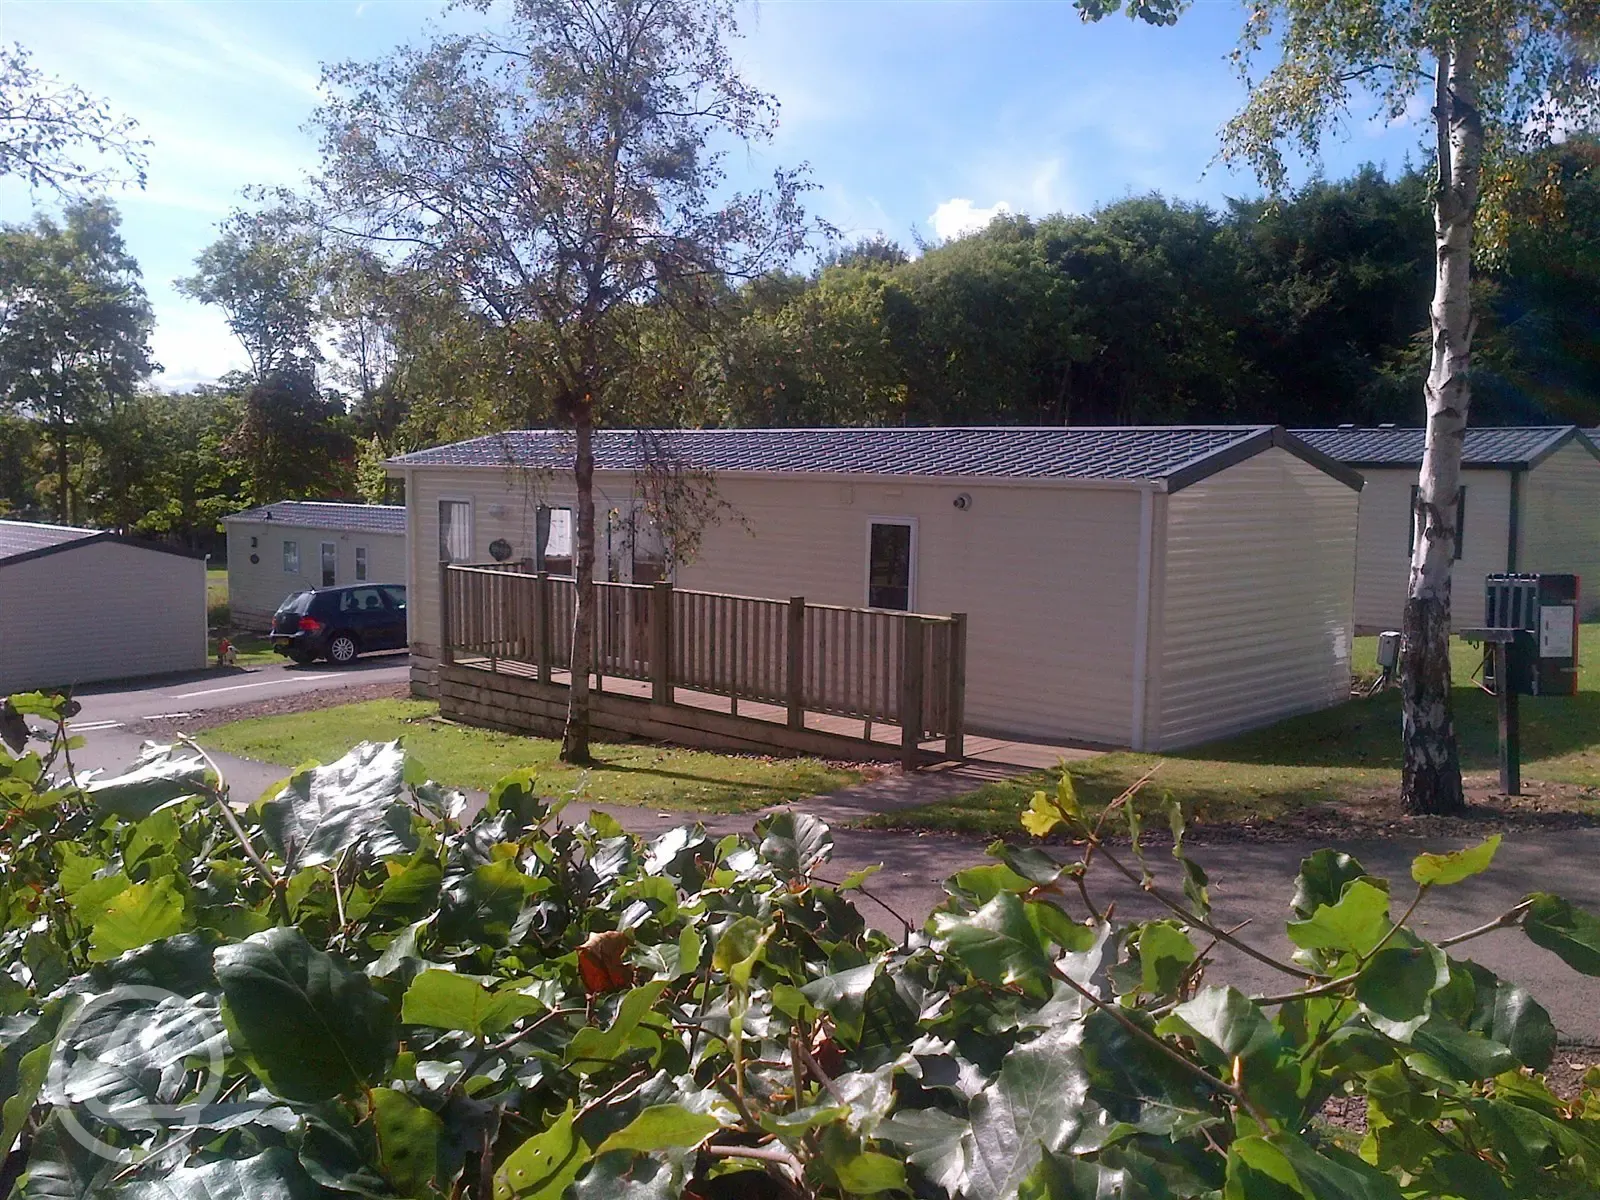 Holiday Homes to hire all year round Centrally heated and double glazed as standard